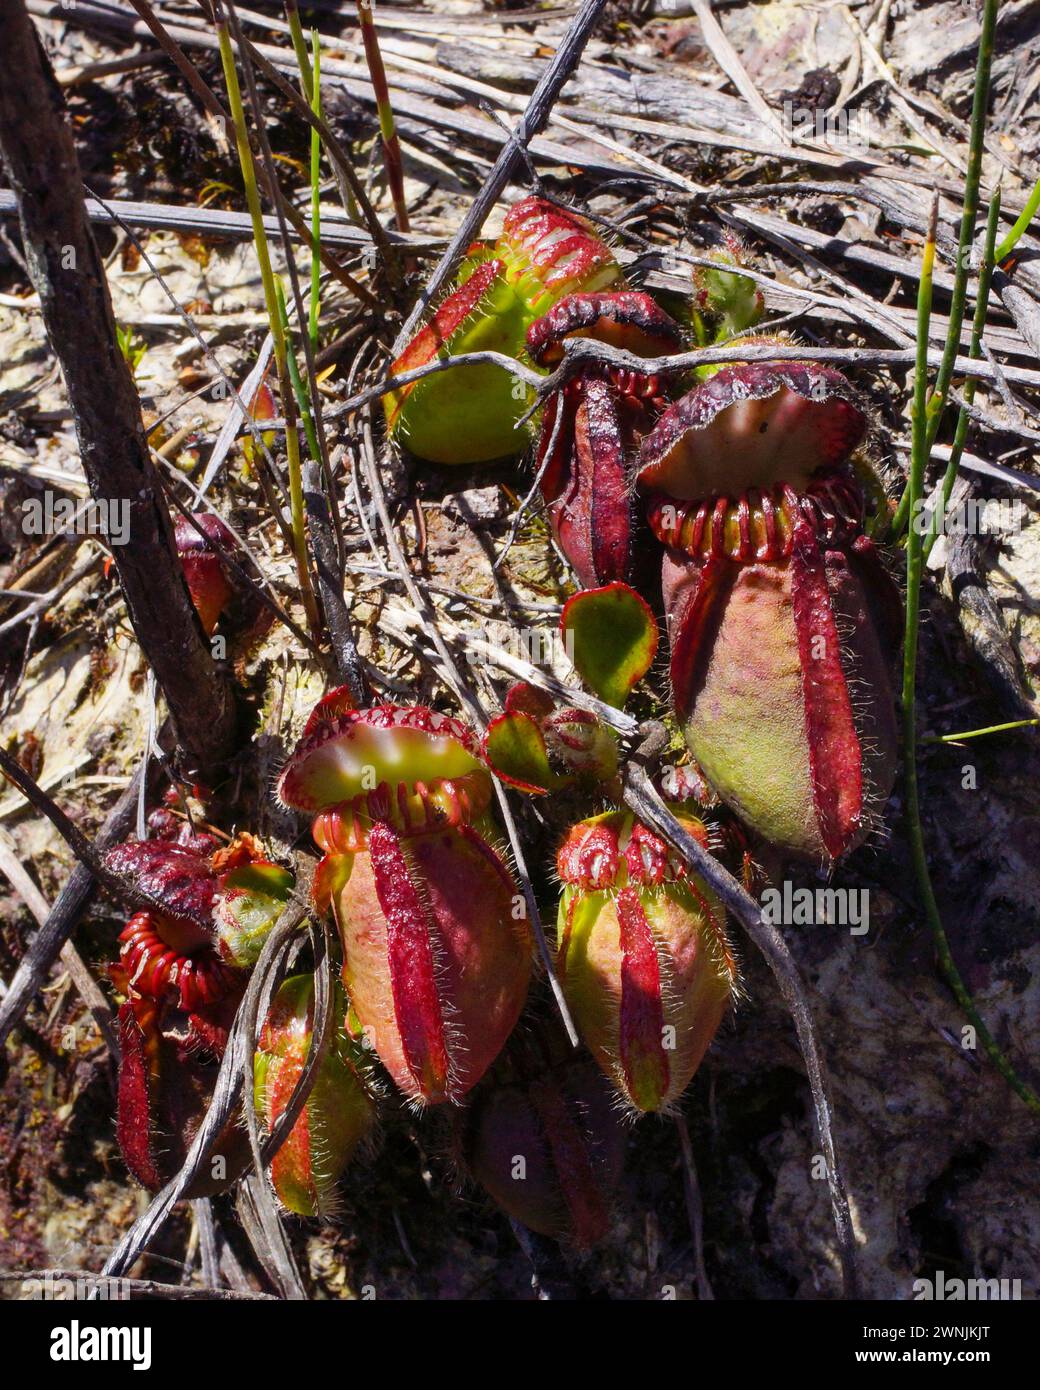 Albany pitcher plant (Cephalotus follicularis), adult pitchers in the sun, in natural habitat, Western Australia Stock Photo